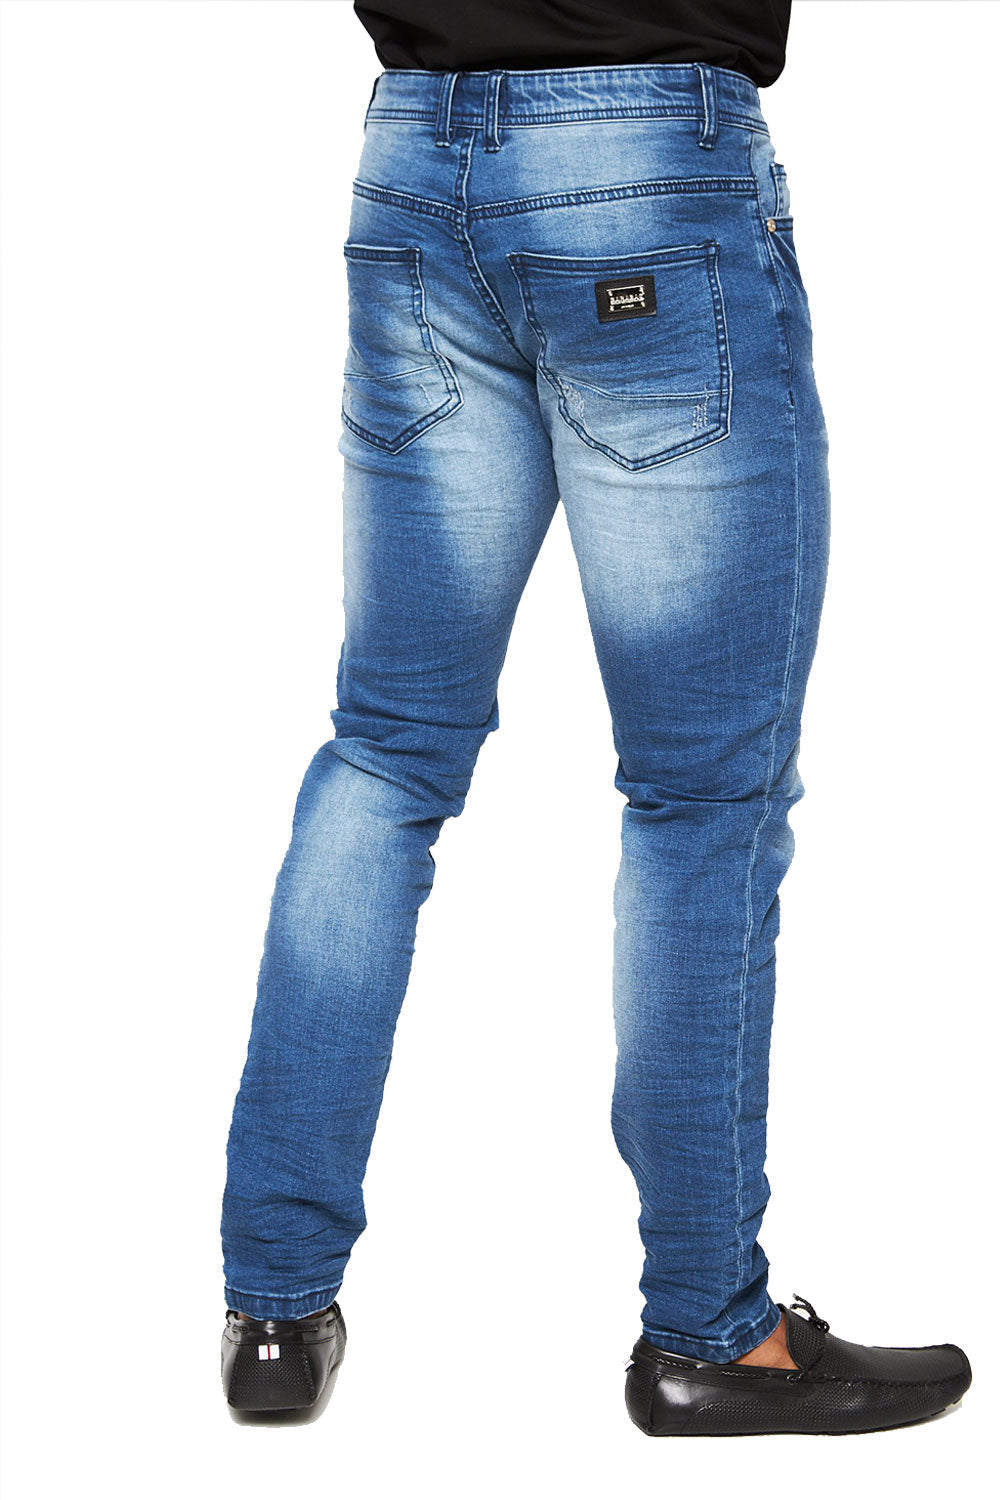 Zxn Clothing Ladies Premium Stretchable Slim Fit Rugged Denim Jeans at  300.00 INR in Ghaziabad | Om Fashion